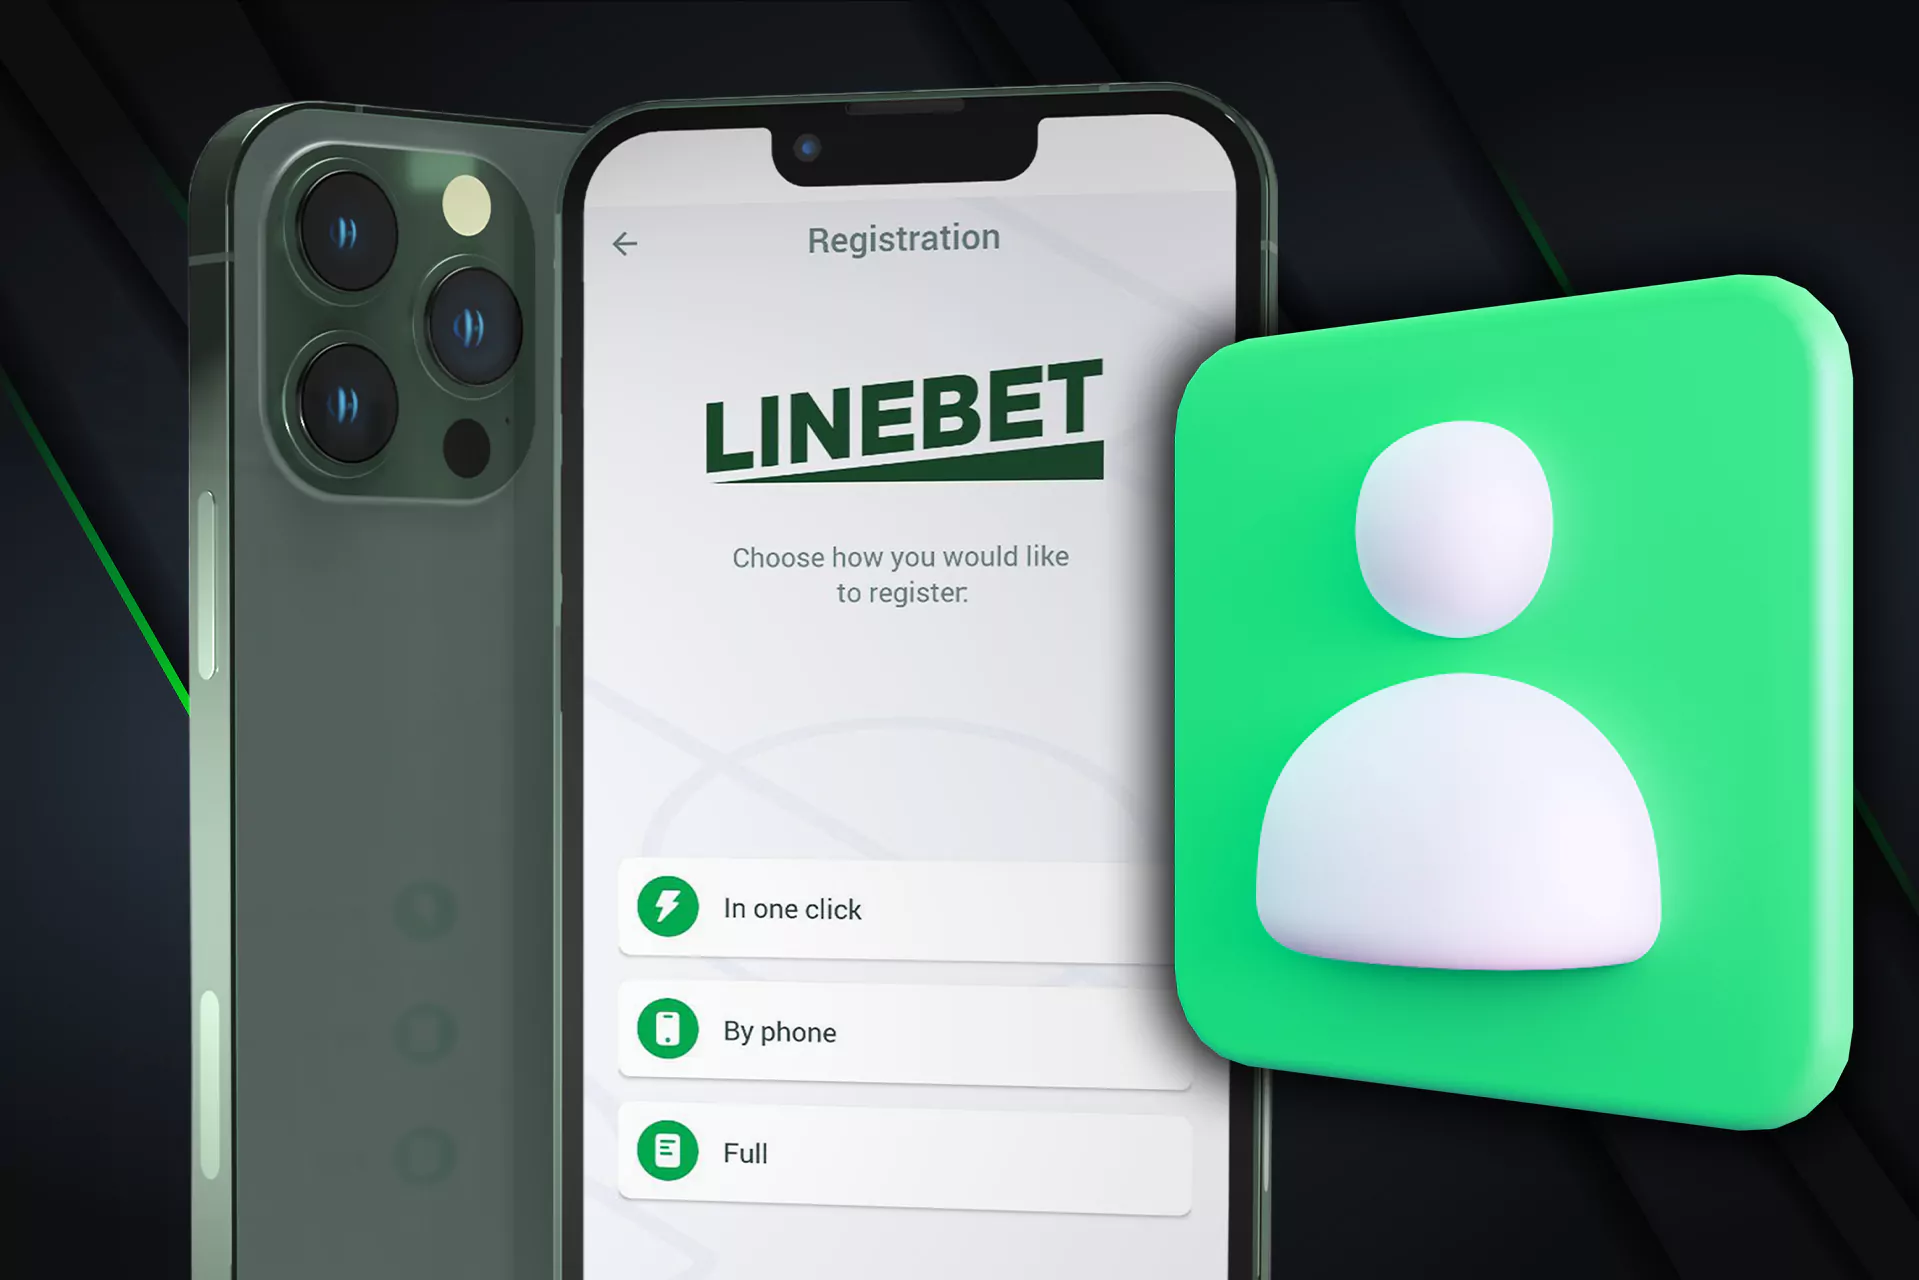 You can Linebet register also via your mobile phone.